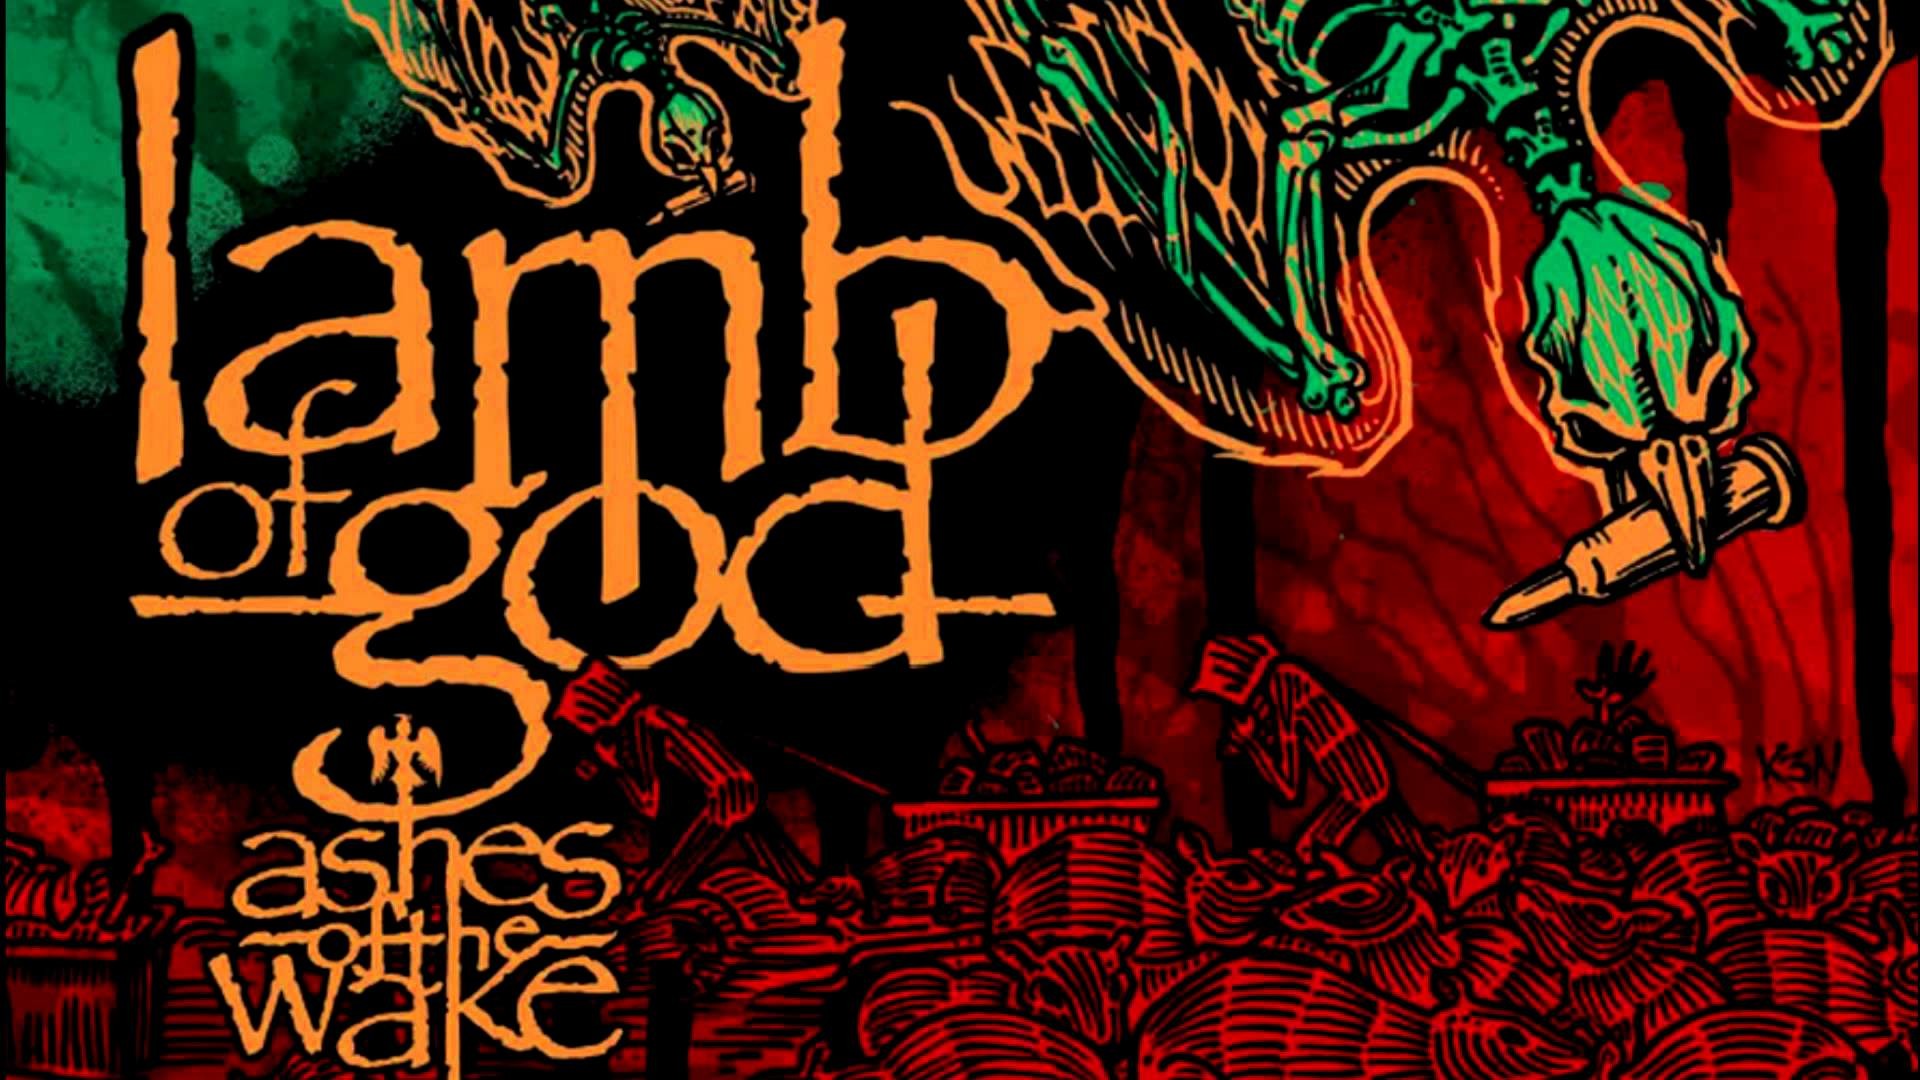 1920x1080 Lamb of God Photo Gallery – Lamb of God Pictures